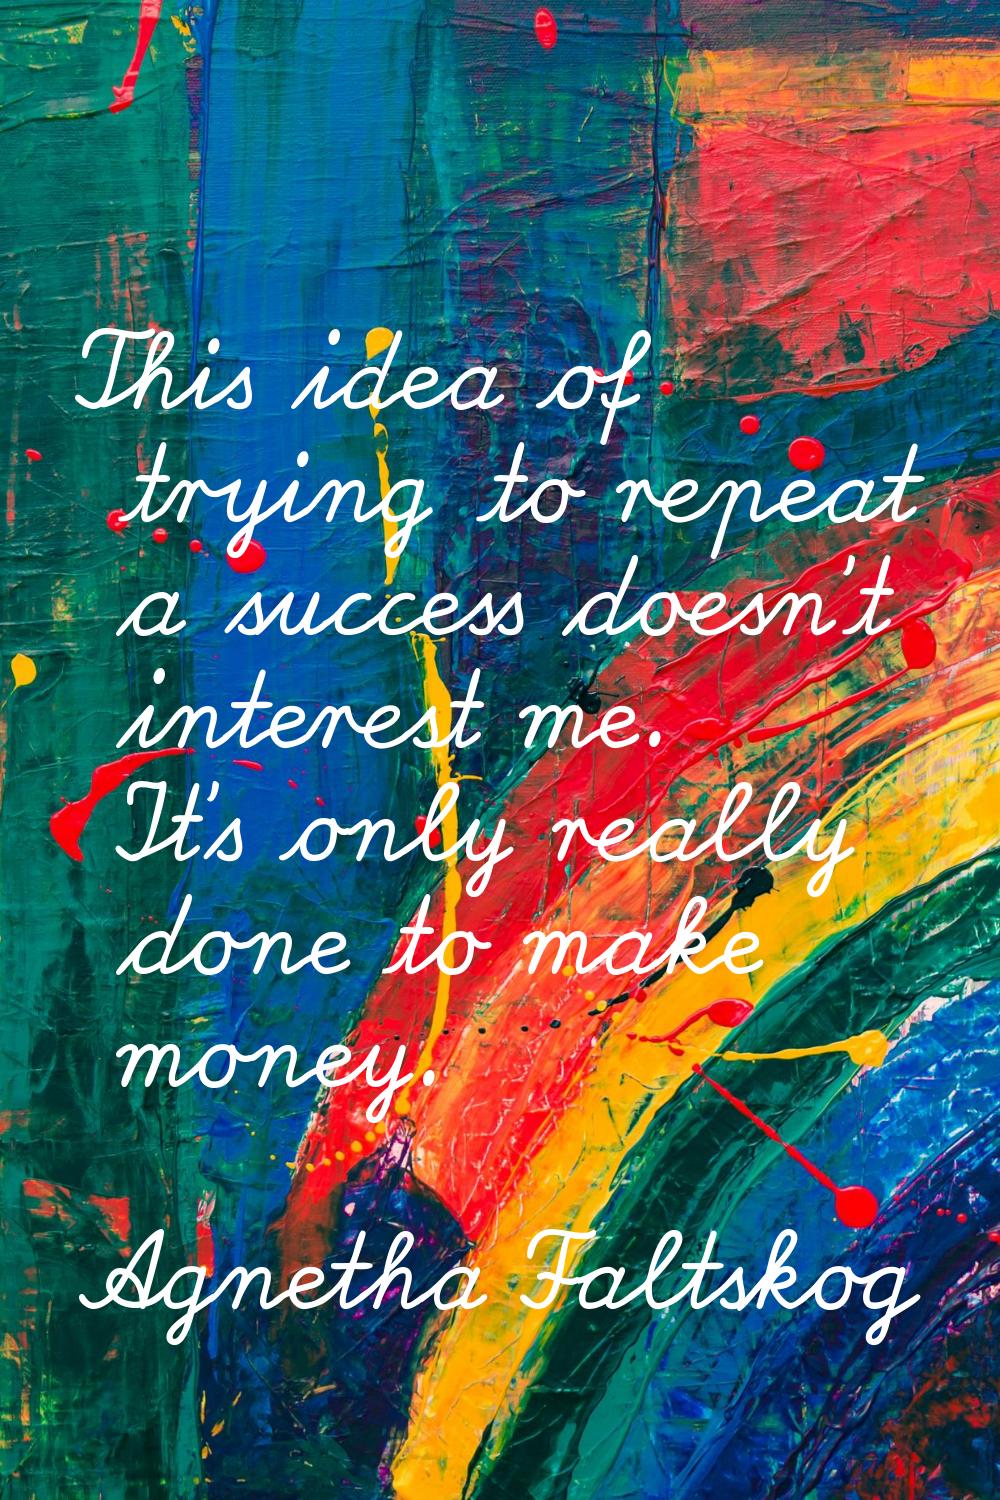 This idea of trying to repeat a success doesn't interest me. It's only really done to make money.